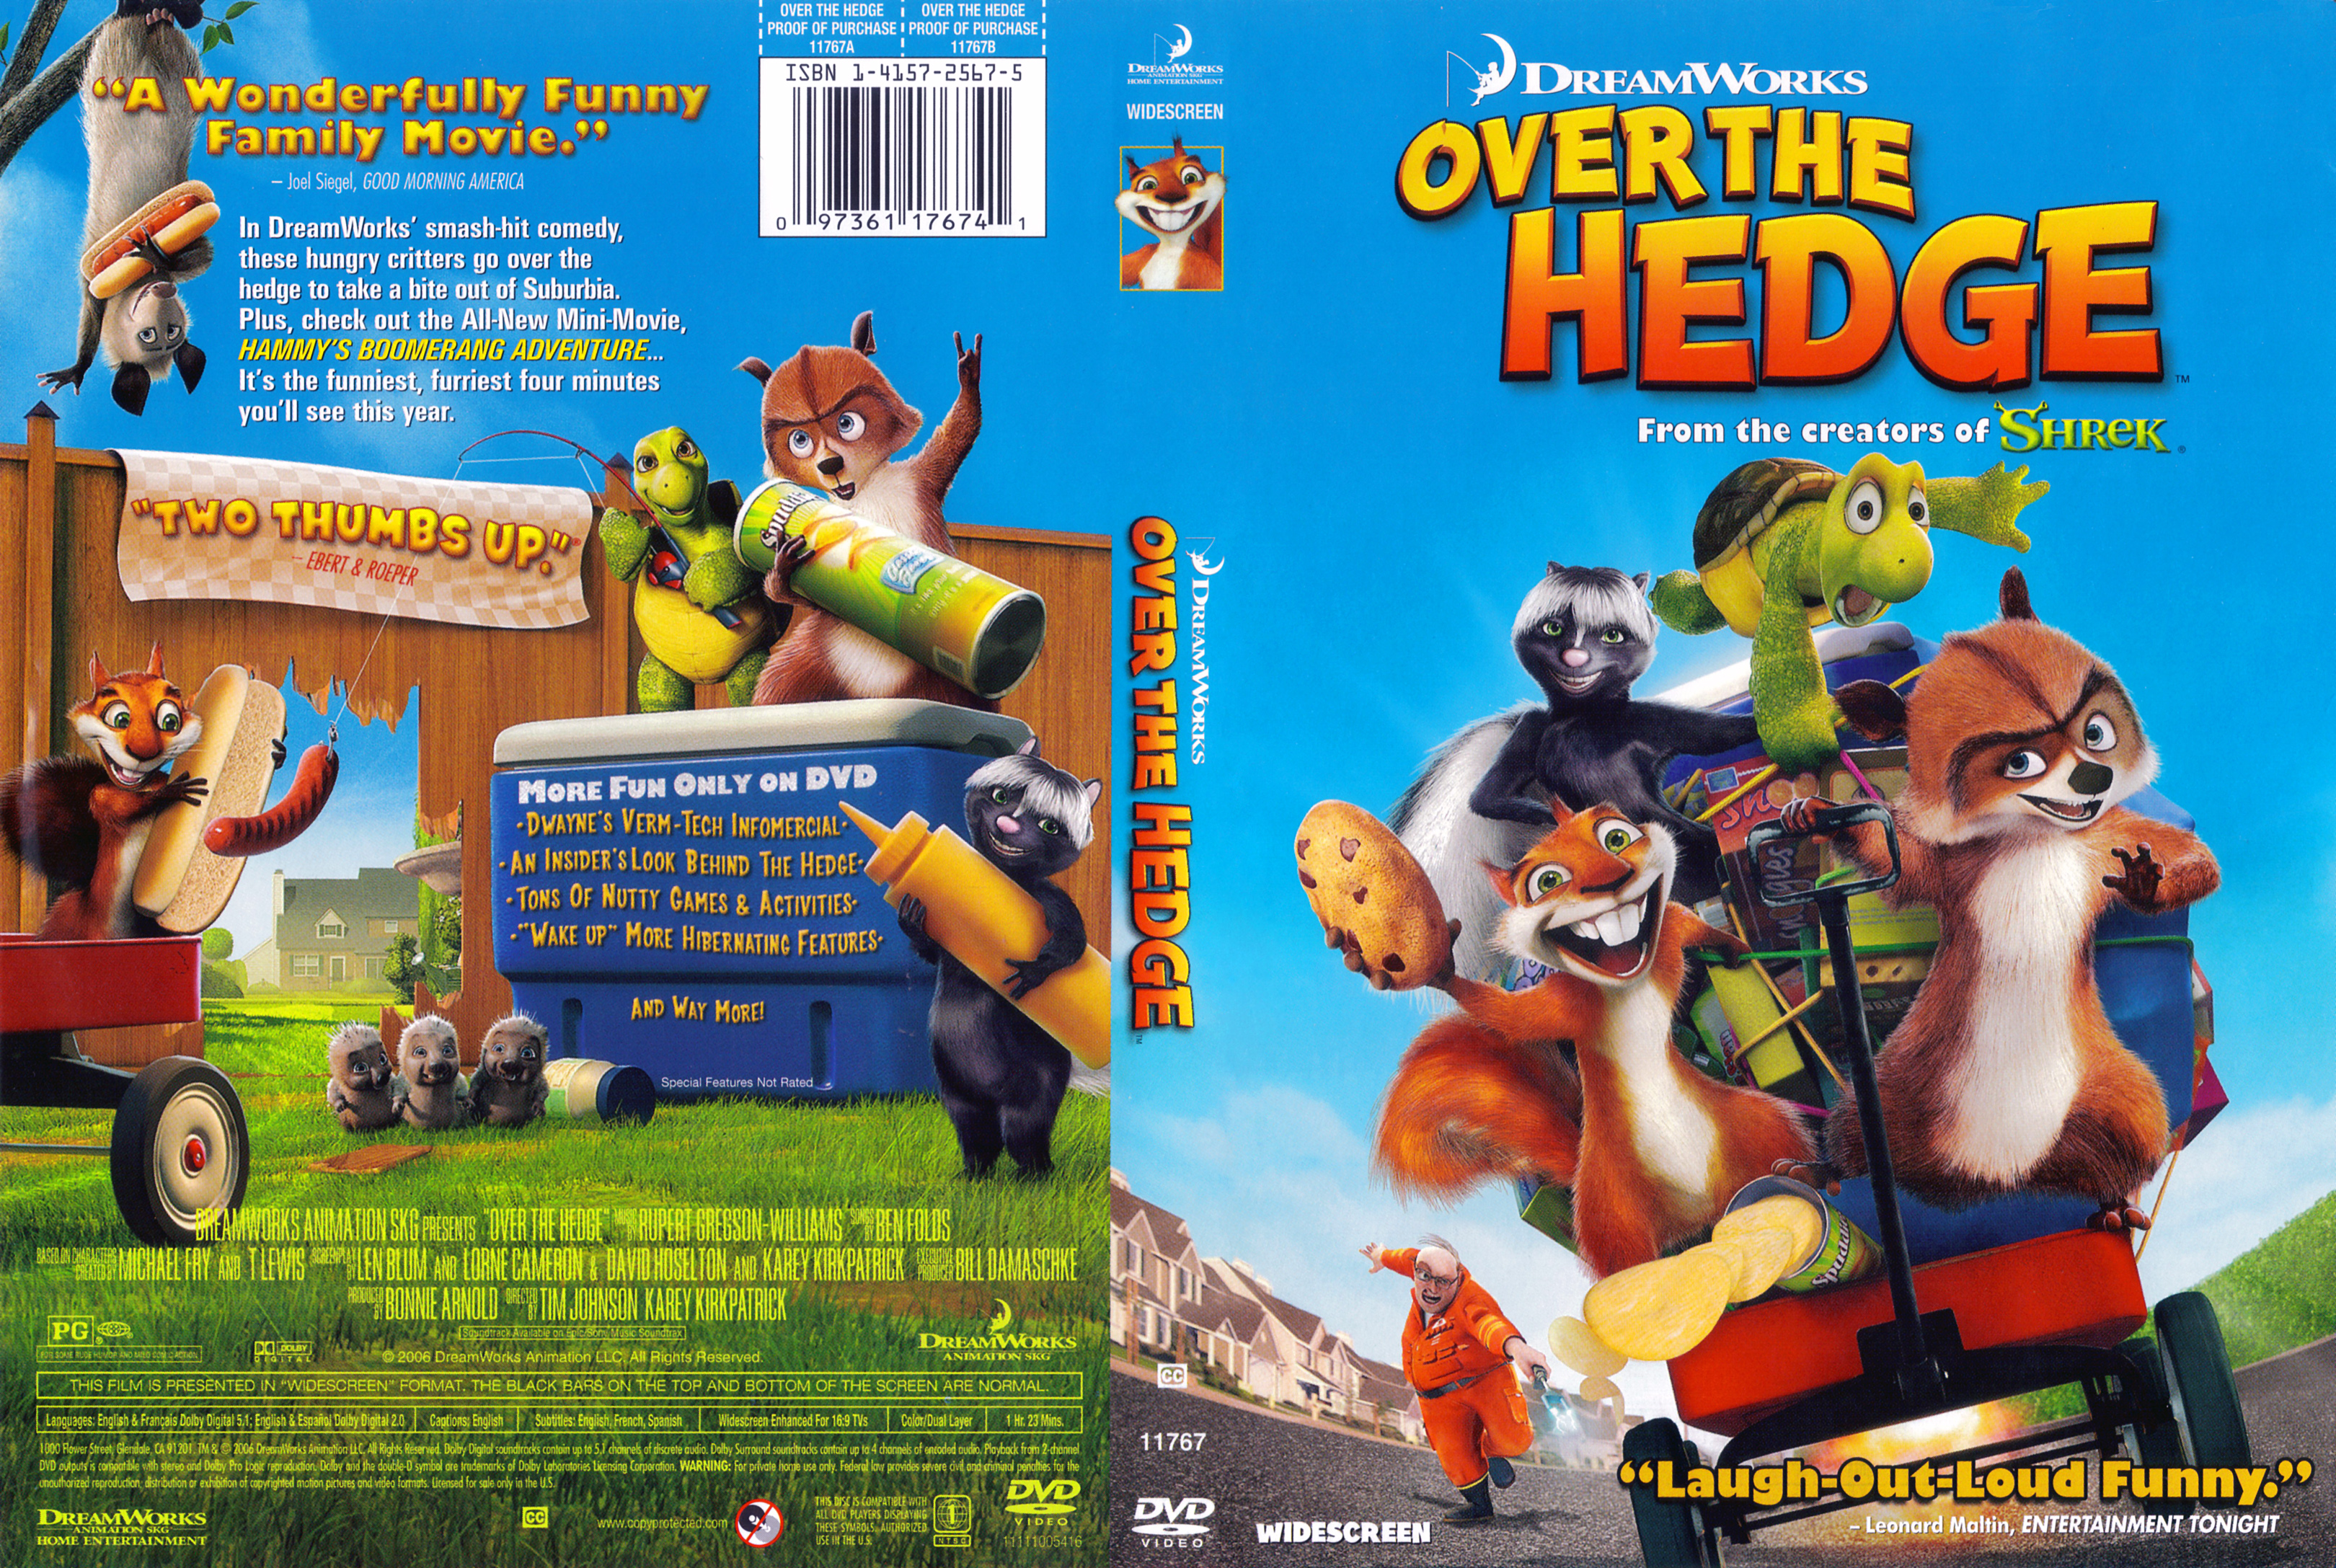 Covers Box Sk Over The Hedge 2006 High Quality Dvd Blueray Movie